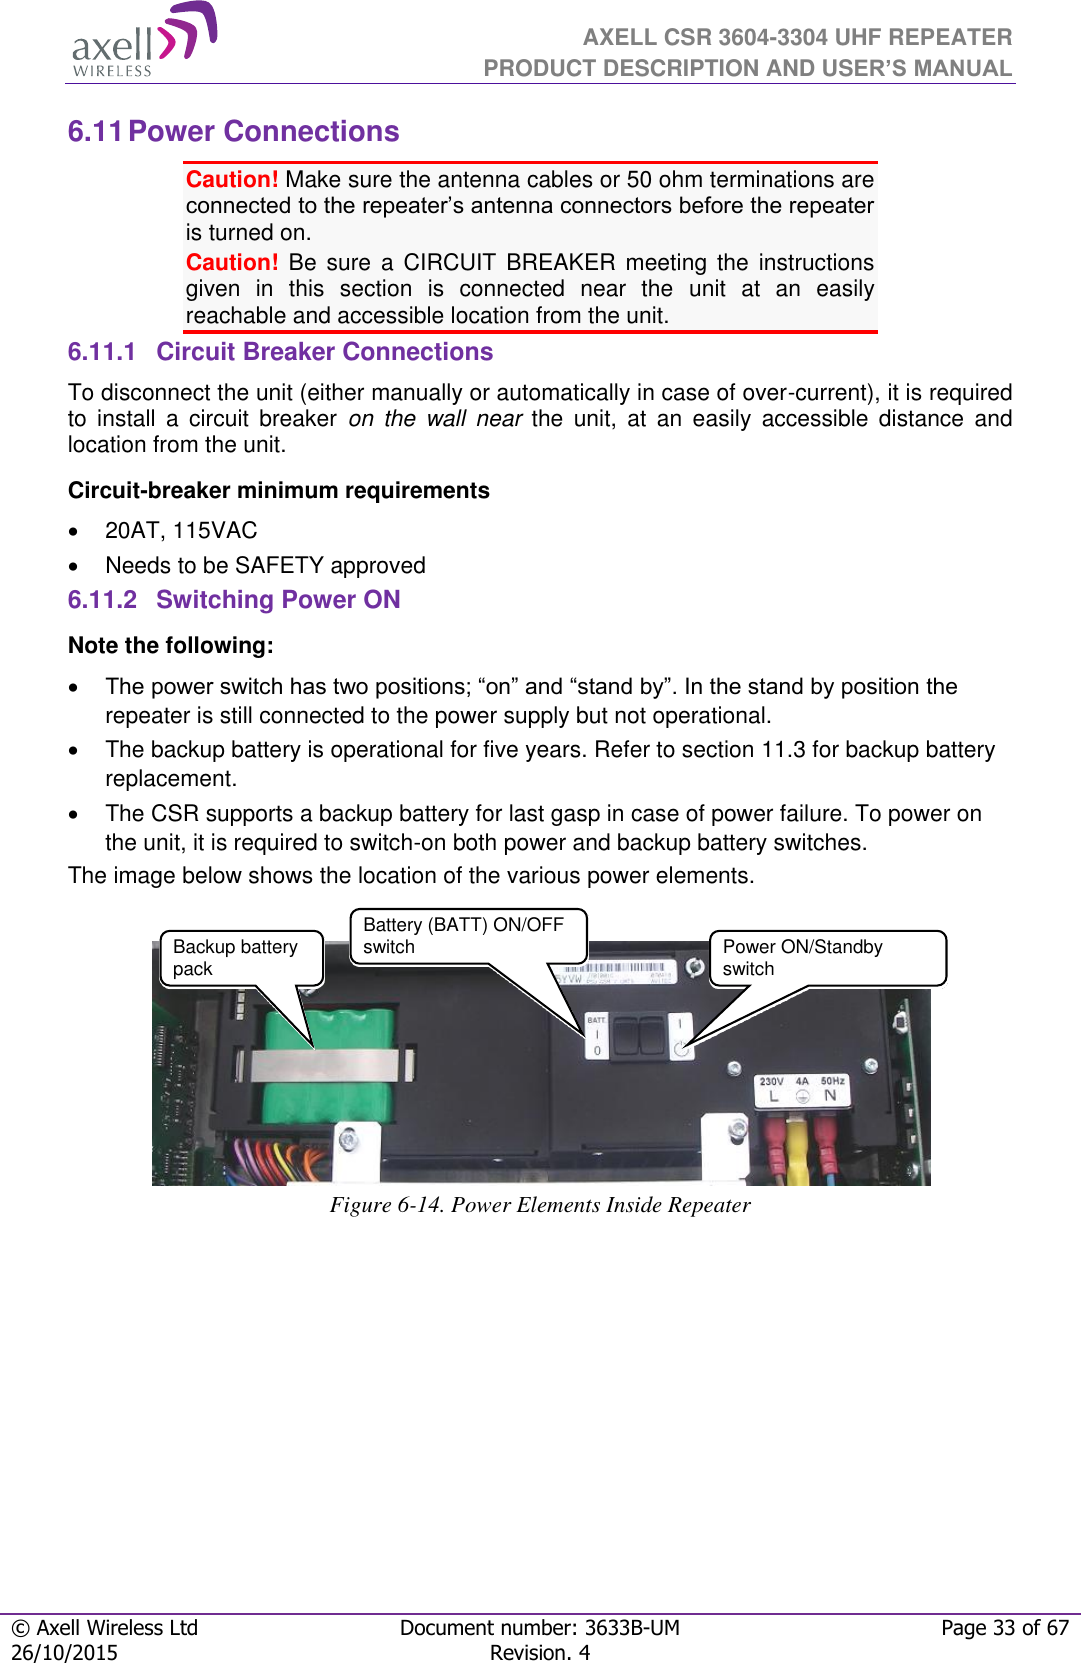  AXELL CSR 3604-3304 UHF REPEATER PRODUCT DESCRIPTION AND USER’S MANUAL  © Axell Wireless Ltd Document number: 3633B-UM Page 33 of 67 26/10/2015 Revision. 4   6.11 Power Connections Caution! Make sure the antenna cables or 50 ohm terminations are connected to the repeater’s antenna connectors before the repeater is turned on.  Caution! Be  sure  a  CIRCUIT  BREAKER  meeting  the  instructions given  in  this  section  is  connected  near  the  unit  at  an  easily reachable and accessible location from the unit. 6.11.1  Circuit Breaker Connections To disconnect the unit (either manually or automatically in case of over-current), it is required to  install  a  circuit  breaker  on  the  wall near  the  unit,  at  an  easily  accessible  distance  and location from the unit. Circuit-breaker minimum requirements   20AT, 115VAC   Needs to be SAFETY approved 6.11.2  Switching Power ON Note the following:  The power switch has two positions; “on” and “stand by”. In the stand by position the repeater is still connected to the power supply but not operational.   The backup battery is operational for five years. Refer to section 11.3 for backup battery replacement.  The CSR supports a backup battery for last gasp in case of power failure. To power on the unit, it is required to switch-on both power and backup battery switches. The image below shows the location of the various power elements.     Figure 6-14. Power Elements Inside Repeater   Power ON/Standby switch Backup battery pack  Battery (BATT) ON/OFF switch 